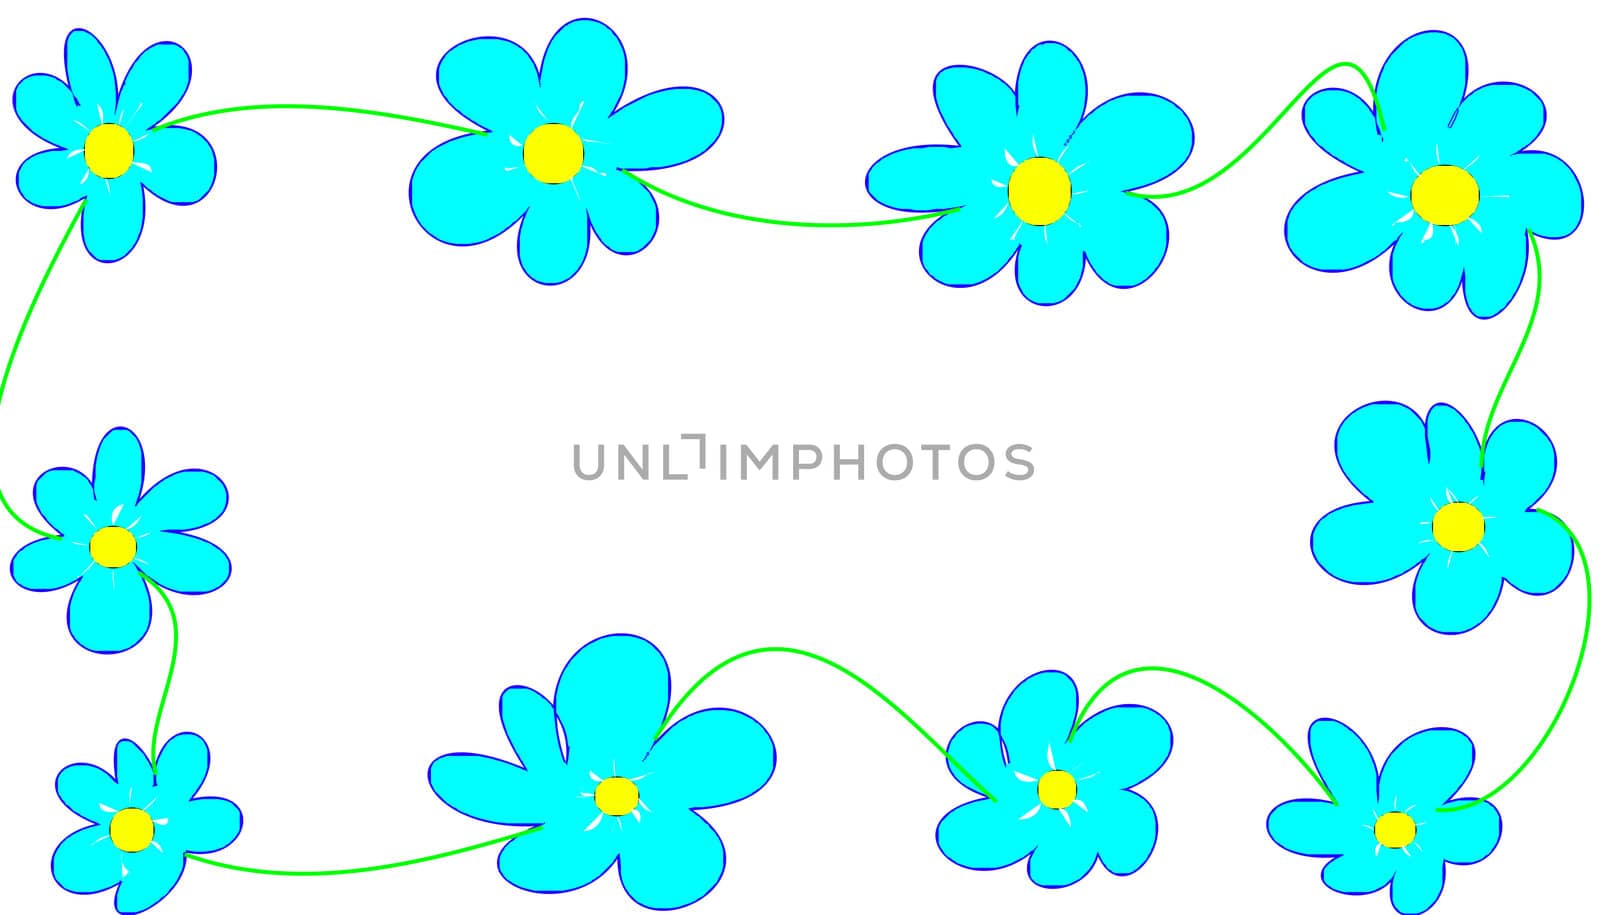 a lot of fowers on white background